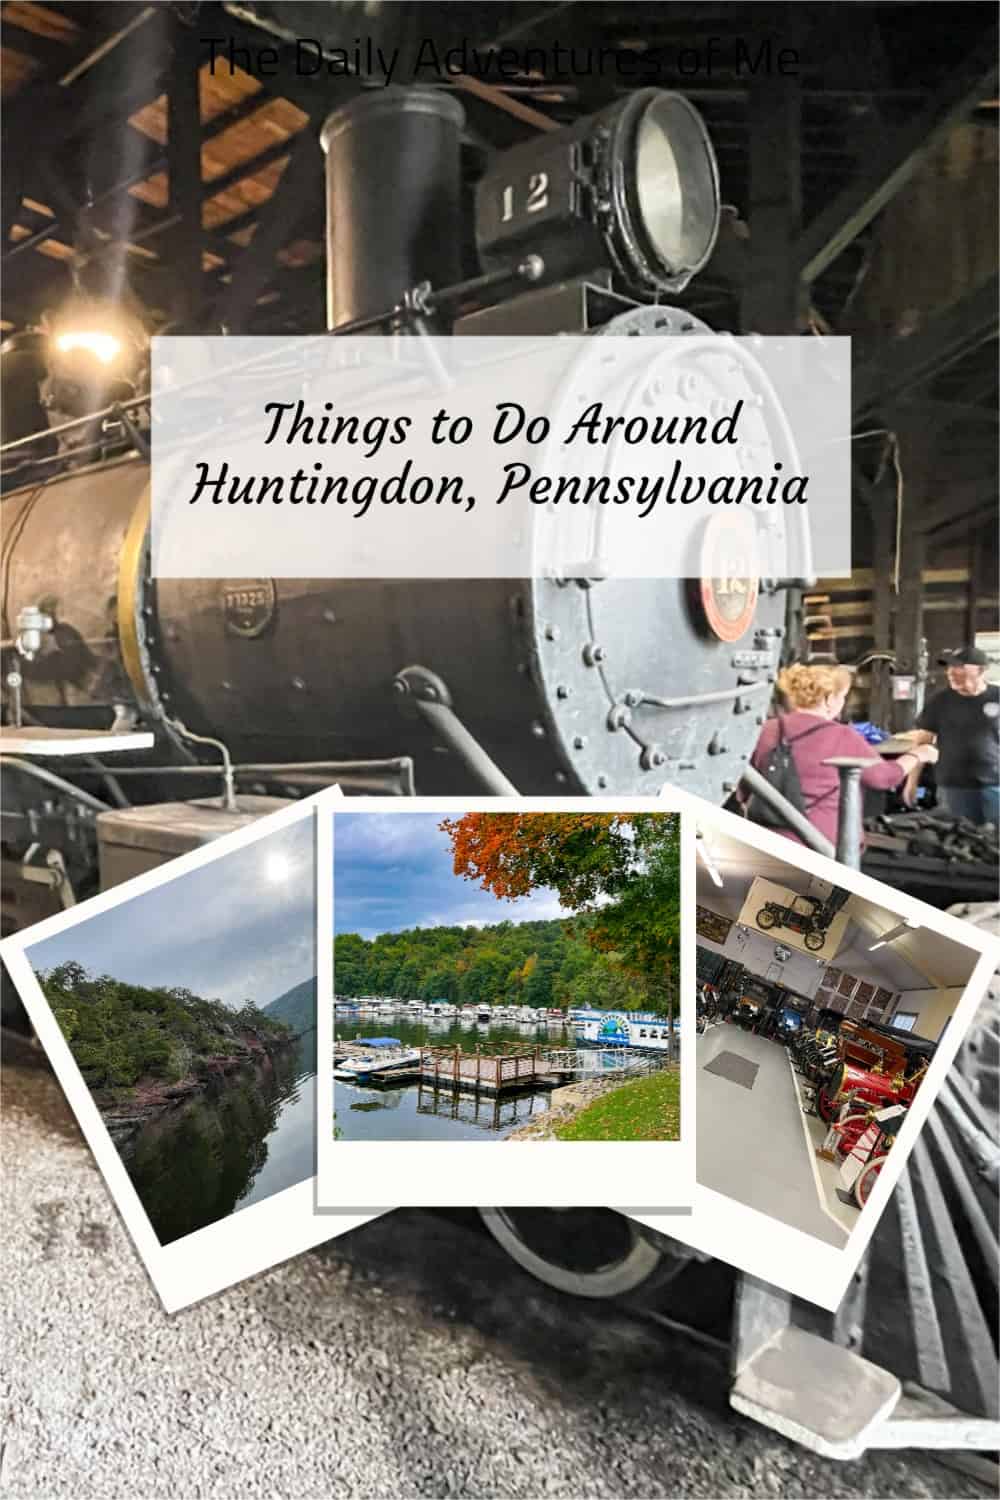 Explore the history of central Pennsylvania by visiting three exciting transportation museums- automobiles, trains and trolleys! @RaystownLakePA #Pennsylaniatravel #transportationmuseum